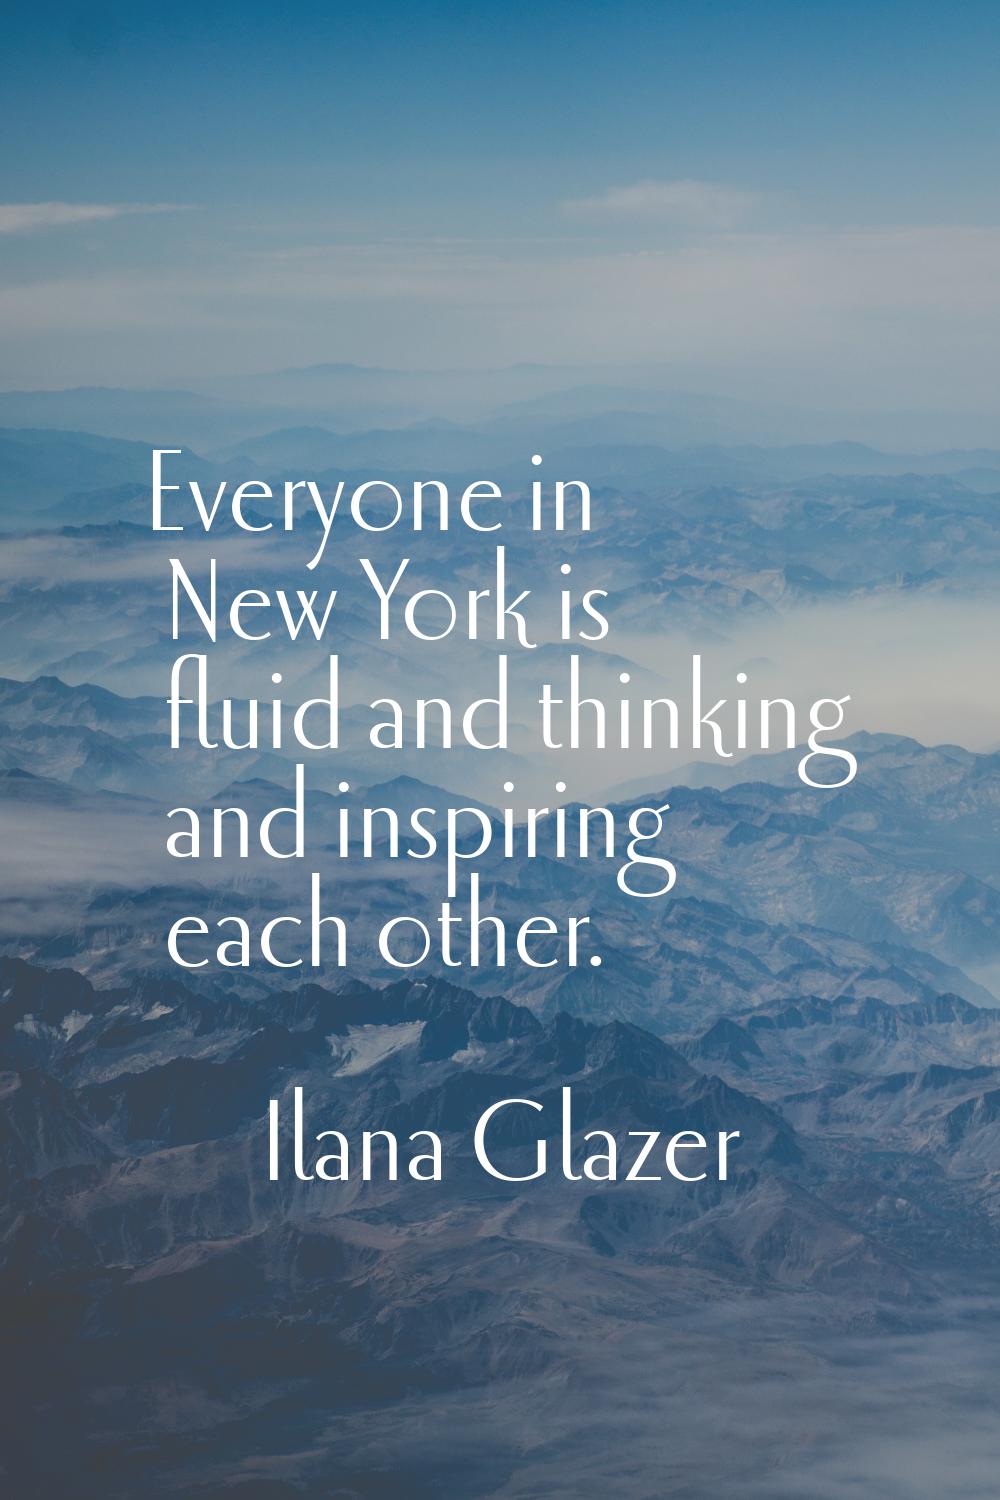 Everyone in New York is fluid and thinking and inspiring each other.